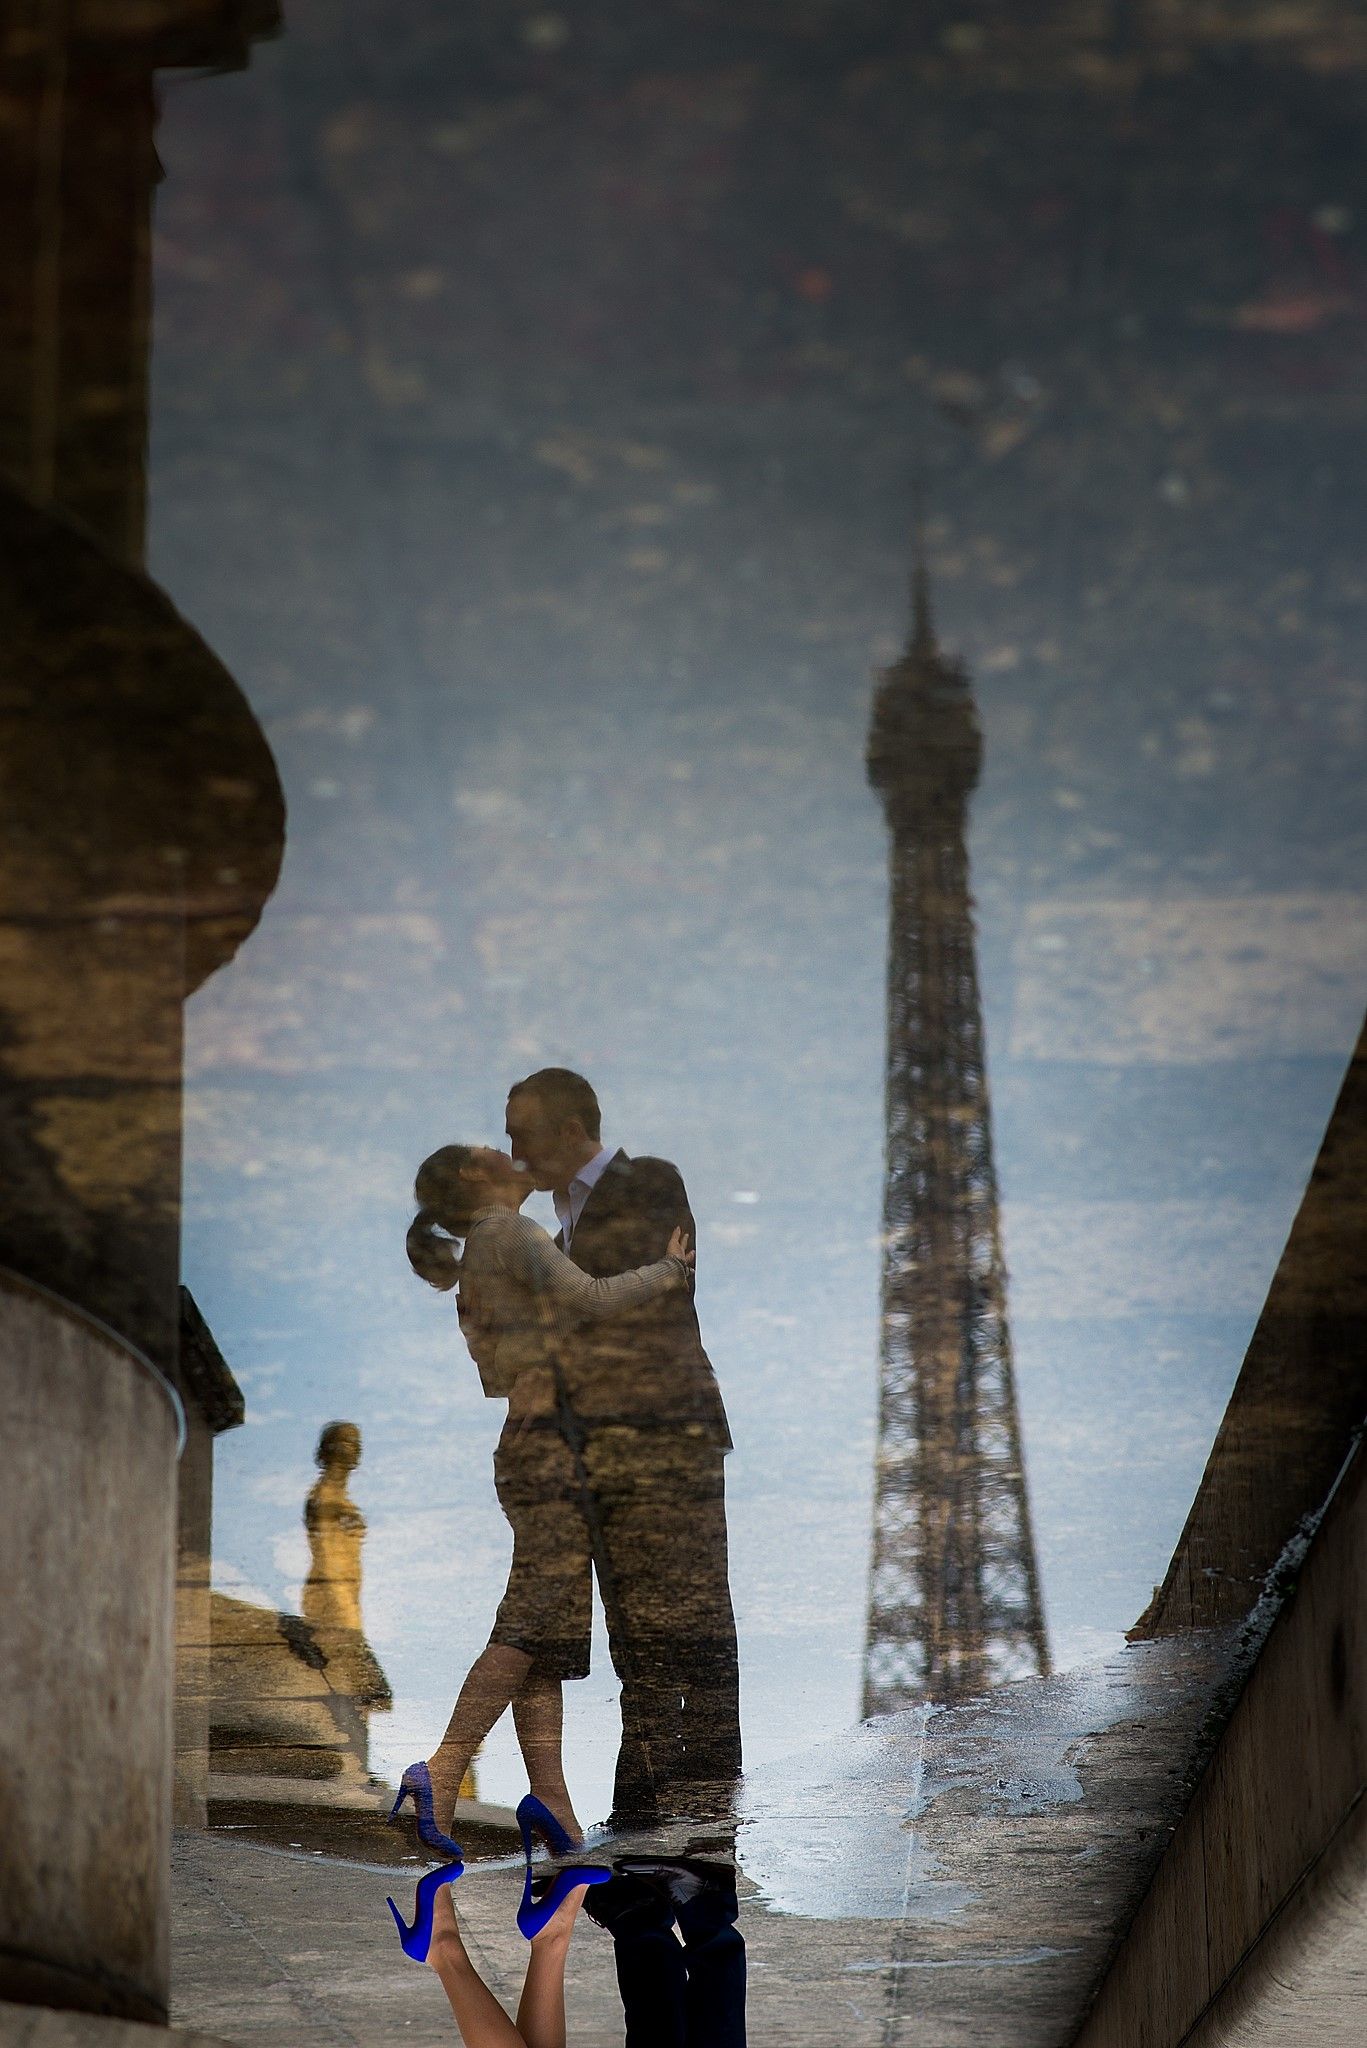 Newly engaged couple kissing in Paris. Reflection in a water puddle ...